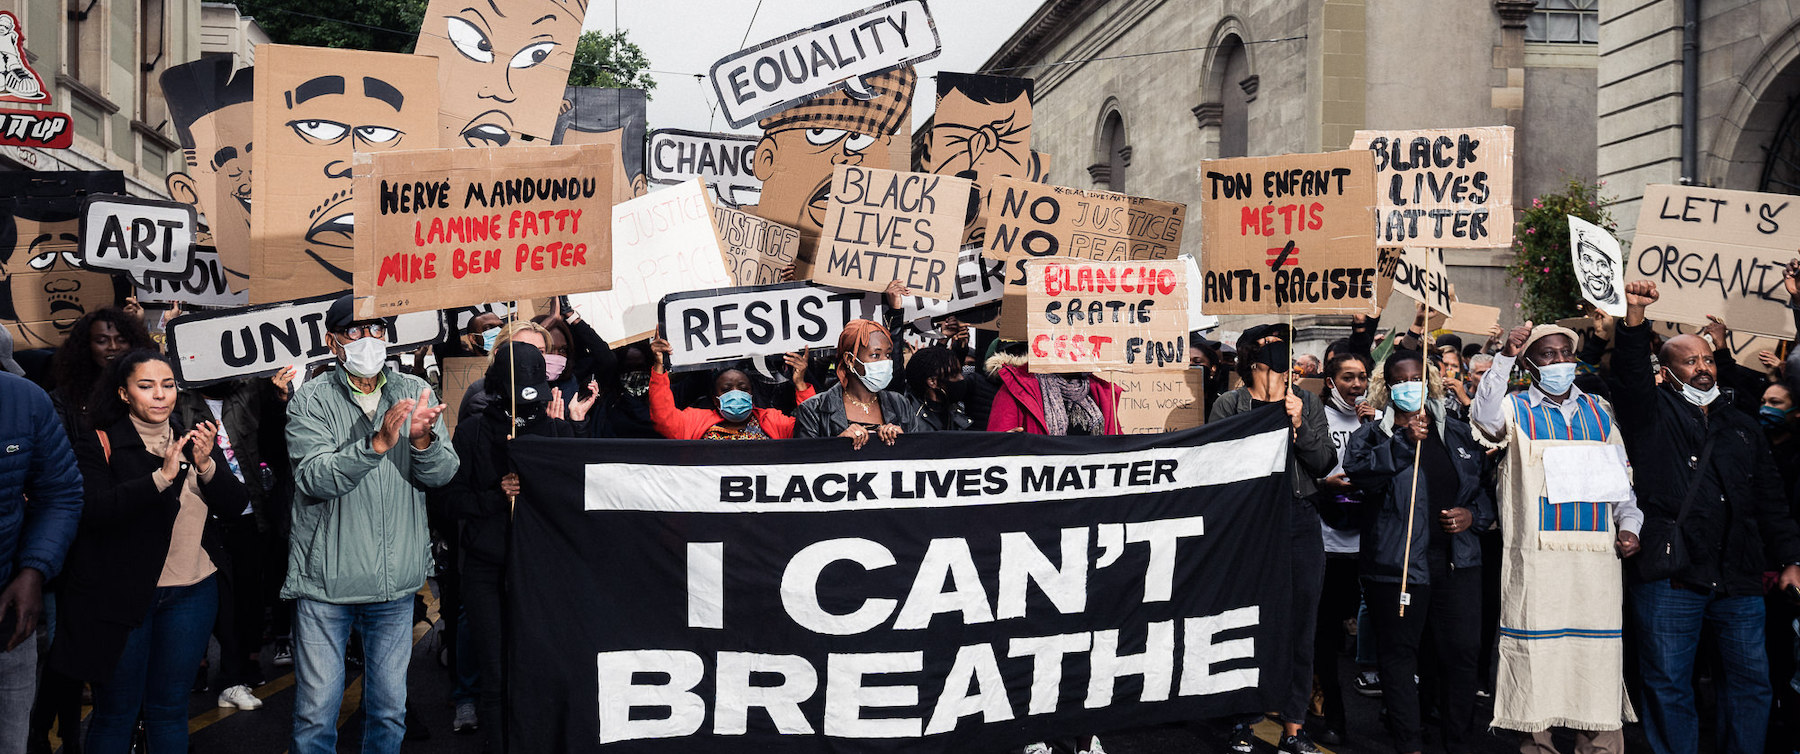 On the image you see many people holding sign like "Black lives matter", "Equality", "Blanchocratie c'est fini" and others. There is a big black banner with white text written "Black lives matter, I can't breath".